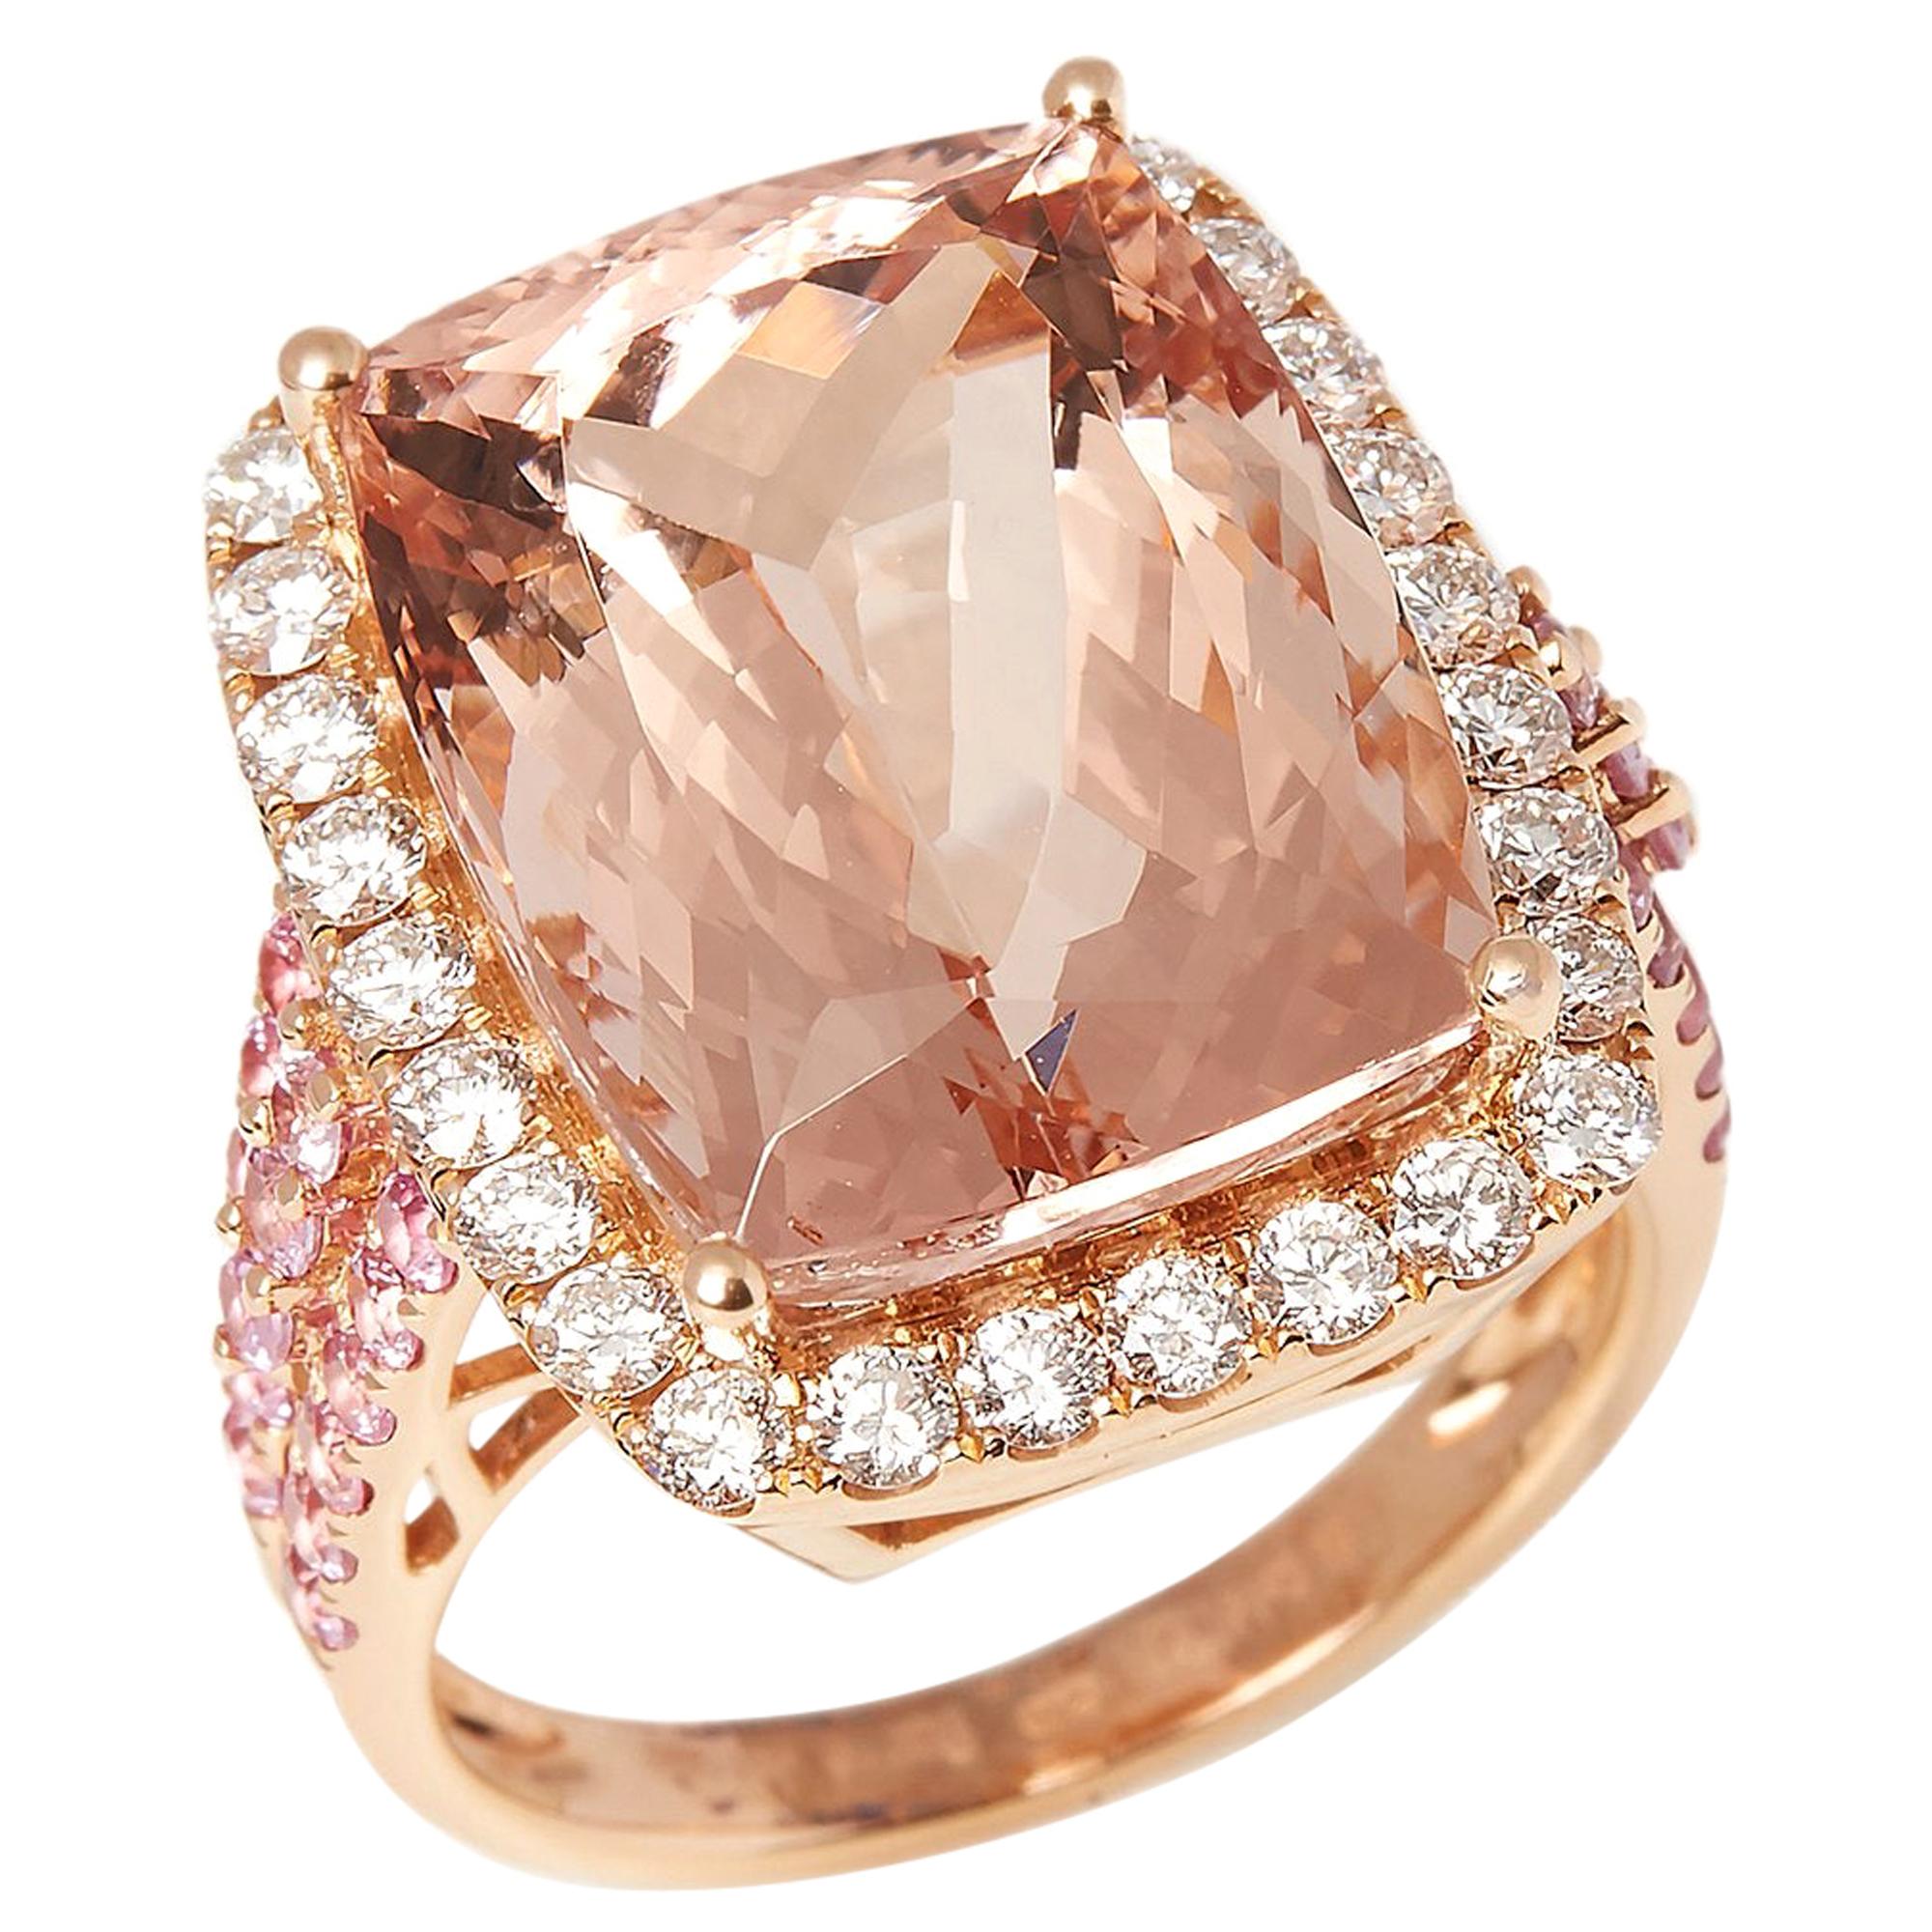 Certified 14.99ct Cushion Cut Morganite, Pink Sapphire and Diamond 18ct ring